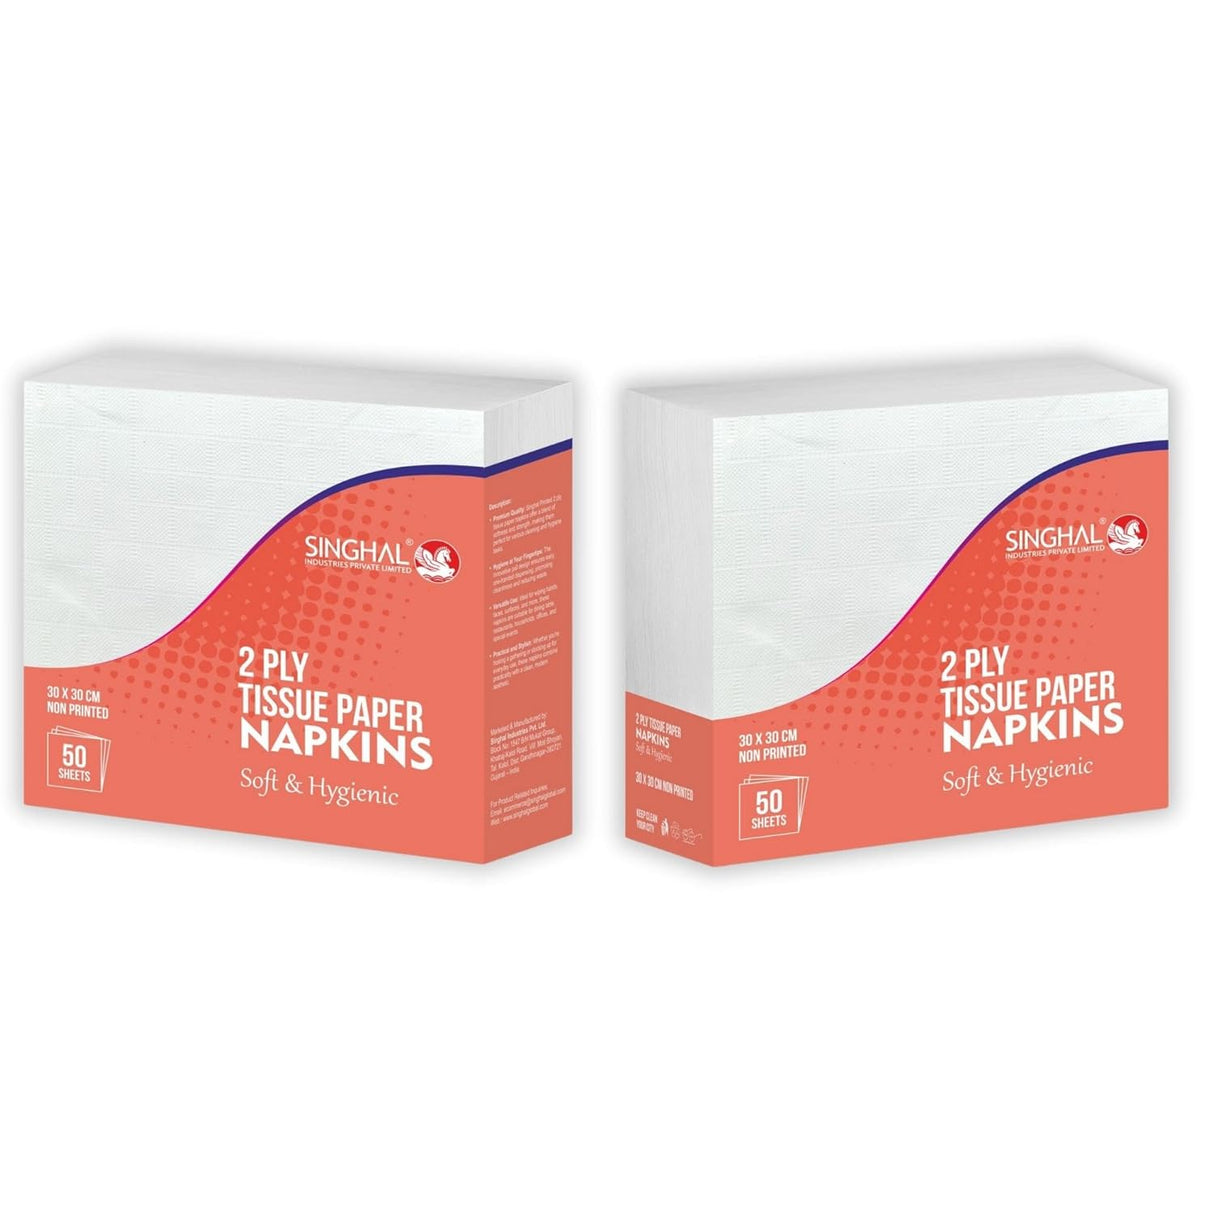 Singhal 2 Ply Tissue Paper Napkins Plain 30x30 CM - Pack of 3 (50 Pulls Per Pack, 150 Sheets)